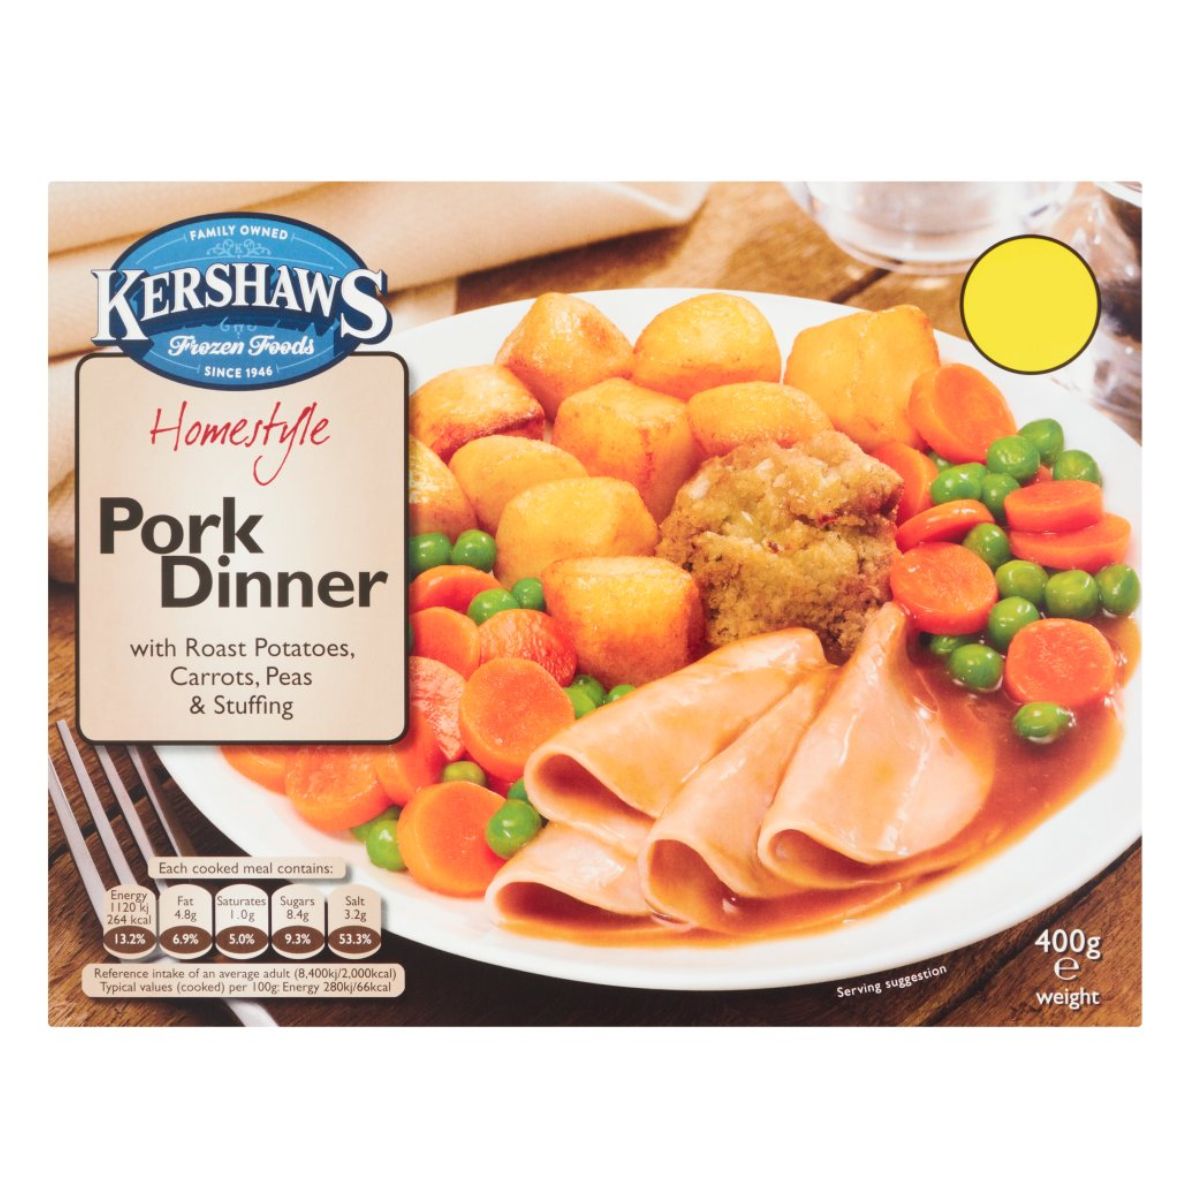 Kershaw's Homestyle Pork Dinner with Roast Potatoes Carrots Peas & Stuffing - 400g on a plate.